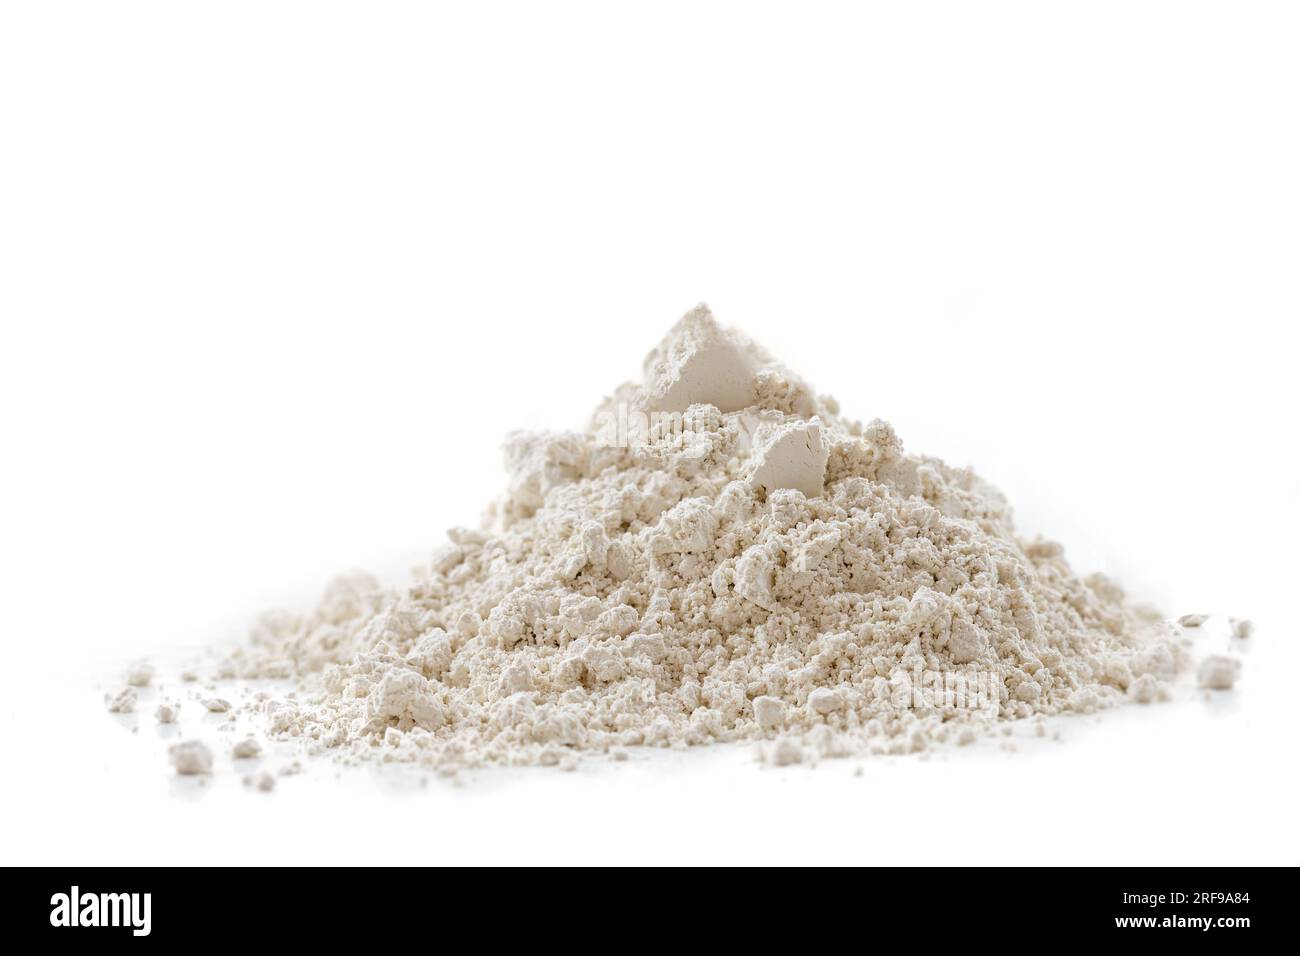 Pile of superfine white clay on white background. Stock Photo